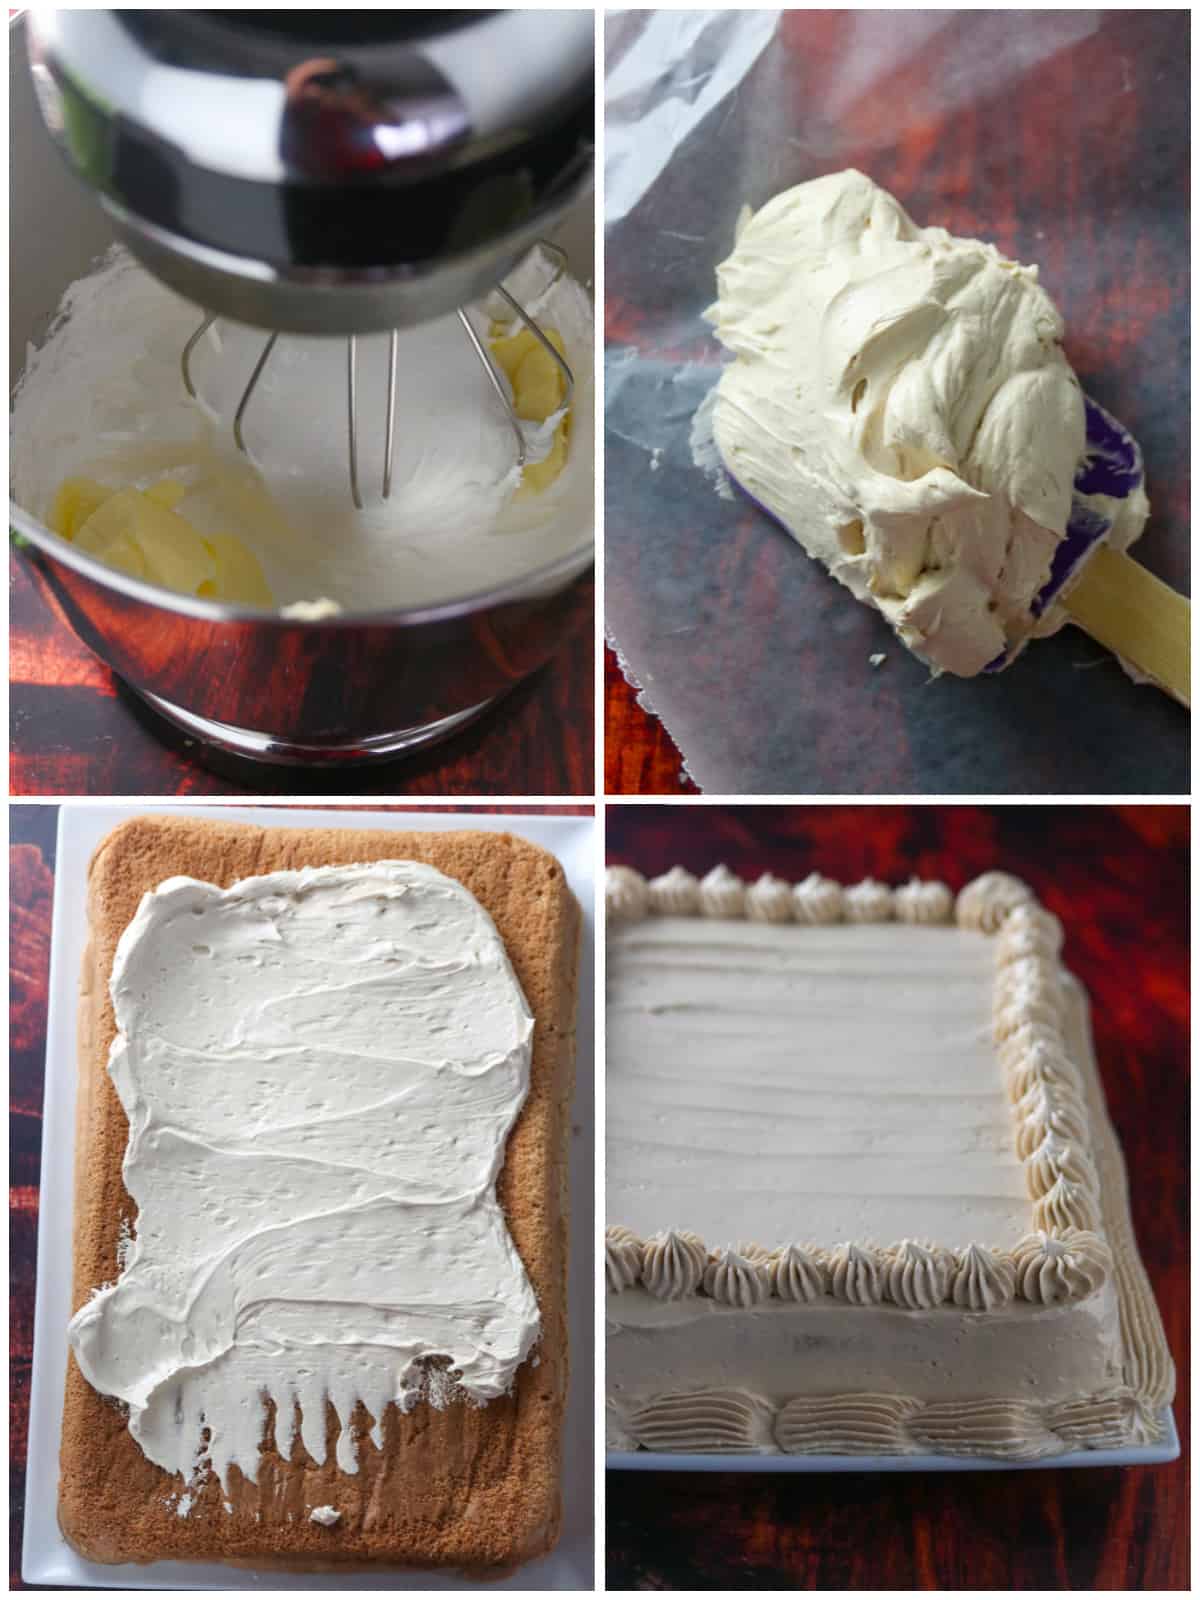 A collage showing the process of making swiss meringue buttercream, then icing the cake.